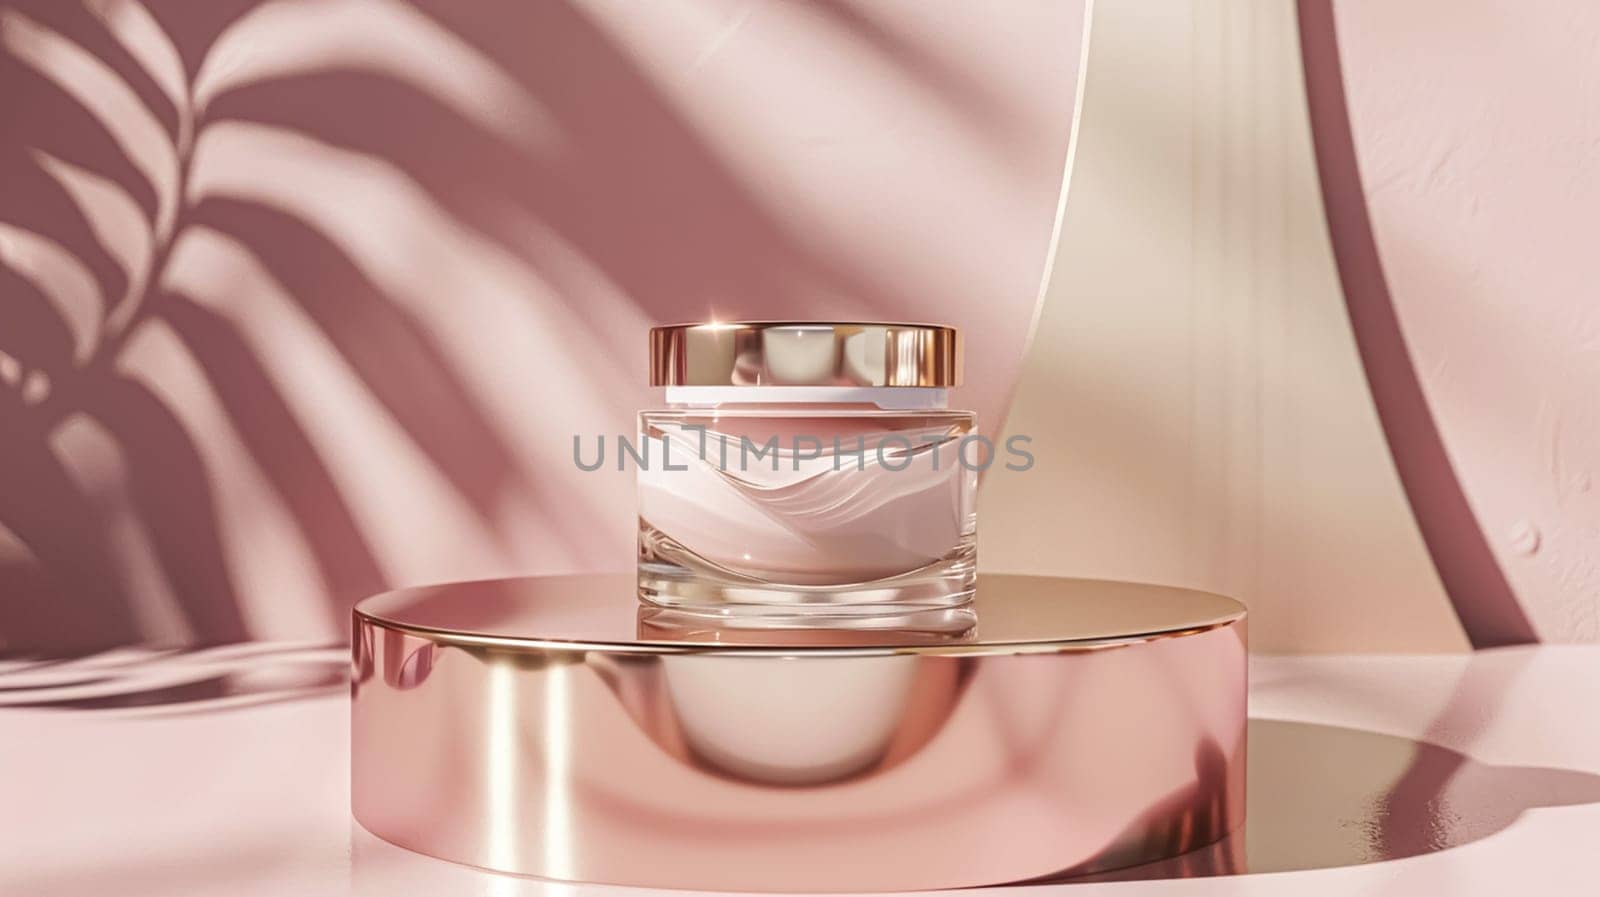 Cosmetic cream in a glass jar on pink background. Skin care concept. Backdrop for beauty products by Olayola